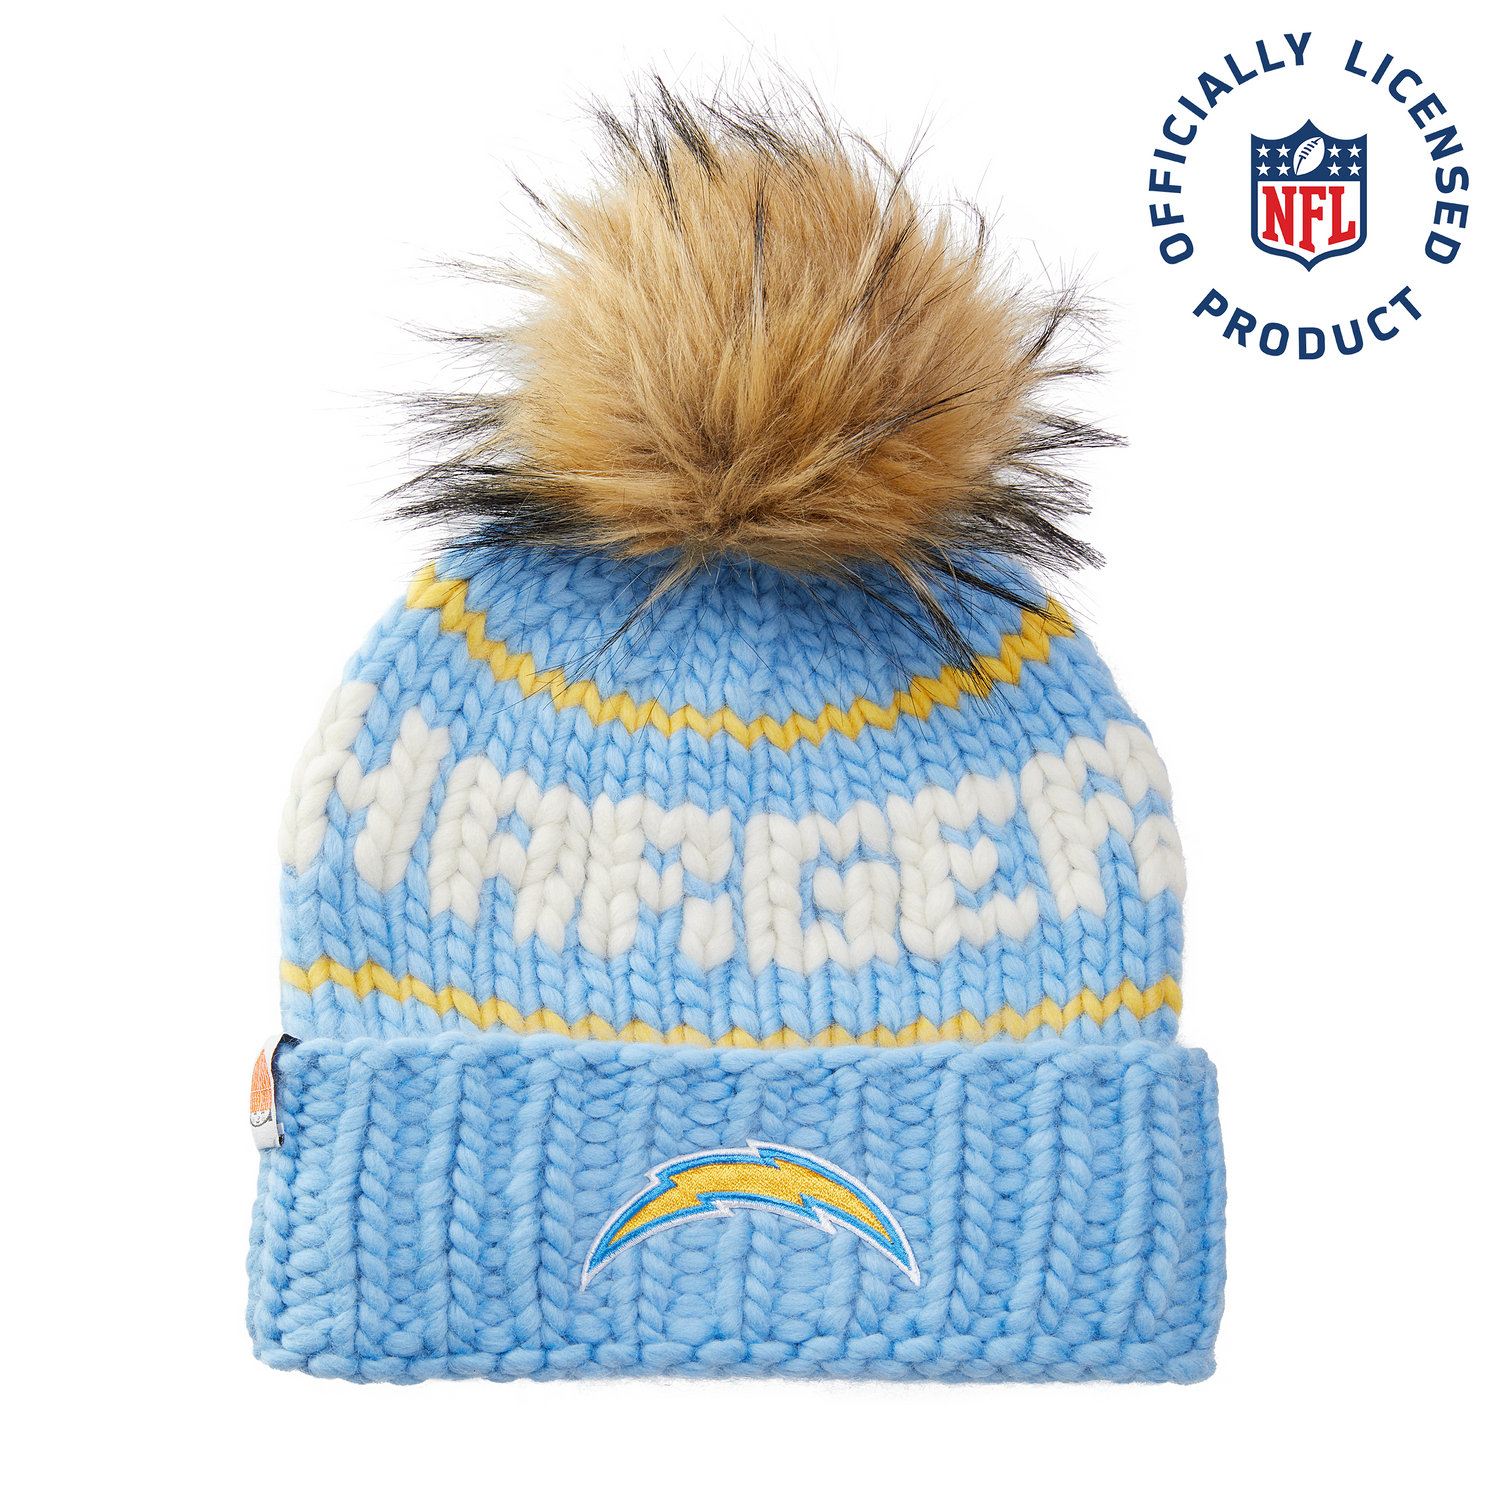 The Chargers NFL Beanie with Faux Fur Pom